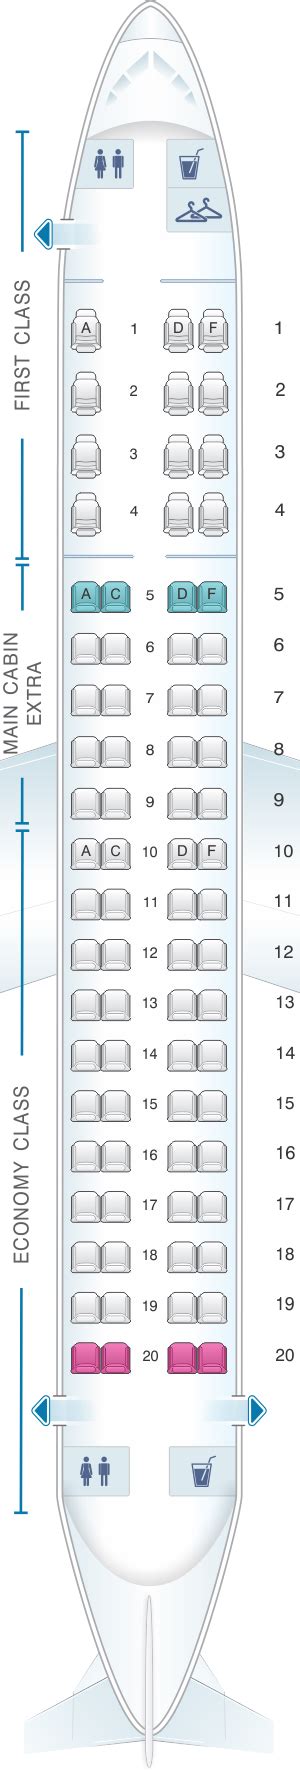 General presentation. This airplane can hold 40 passengers and has no First or Business Class. These planes are operated by American Eagle. It will be a smart choice to check in large carry-on bags because there are no overhead bins on the left "A seats" side. Overhead storage on the right side is also slightly limited.. 